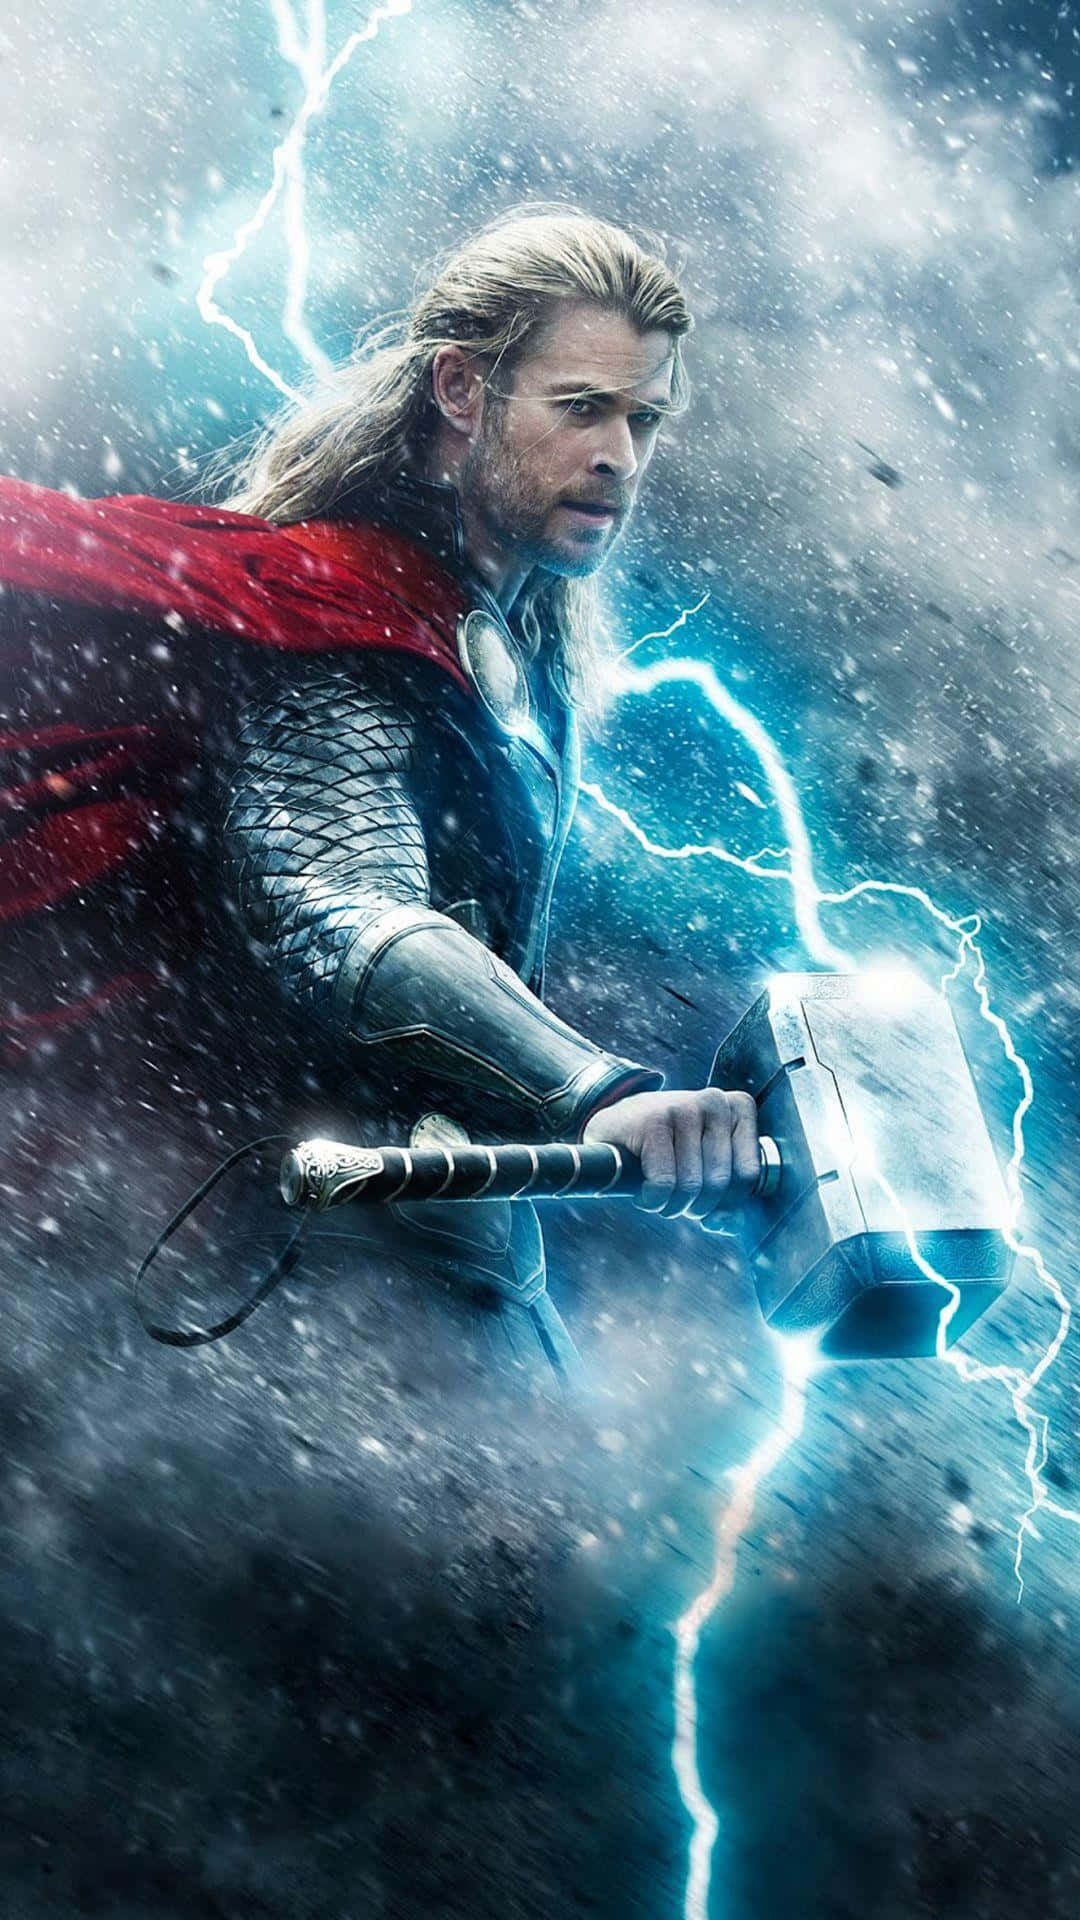 Thor Brings His Might